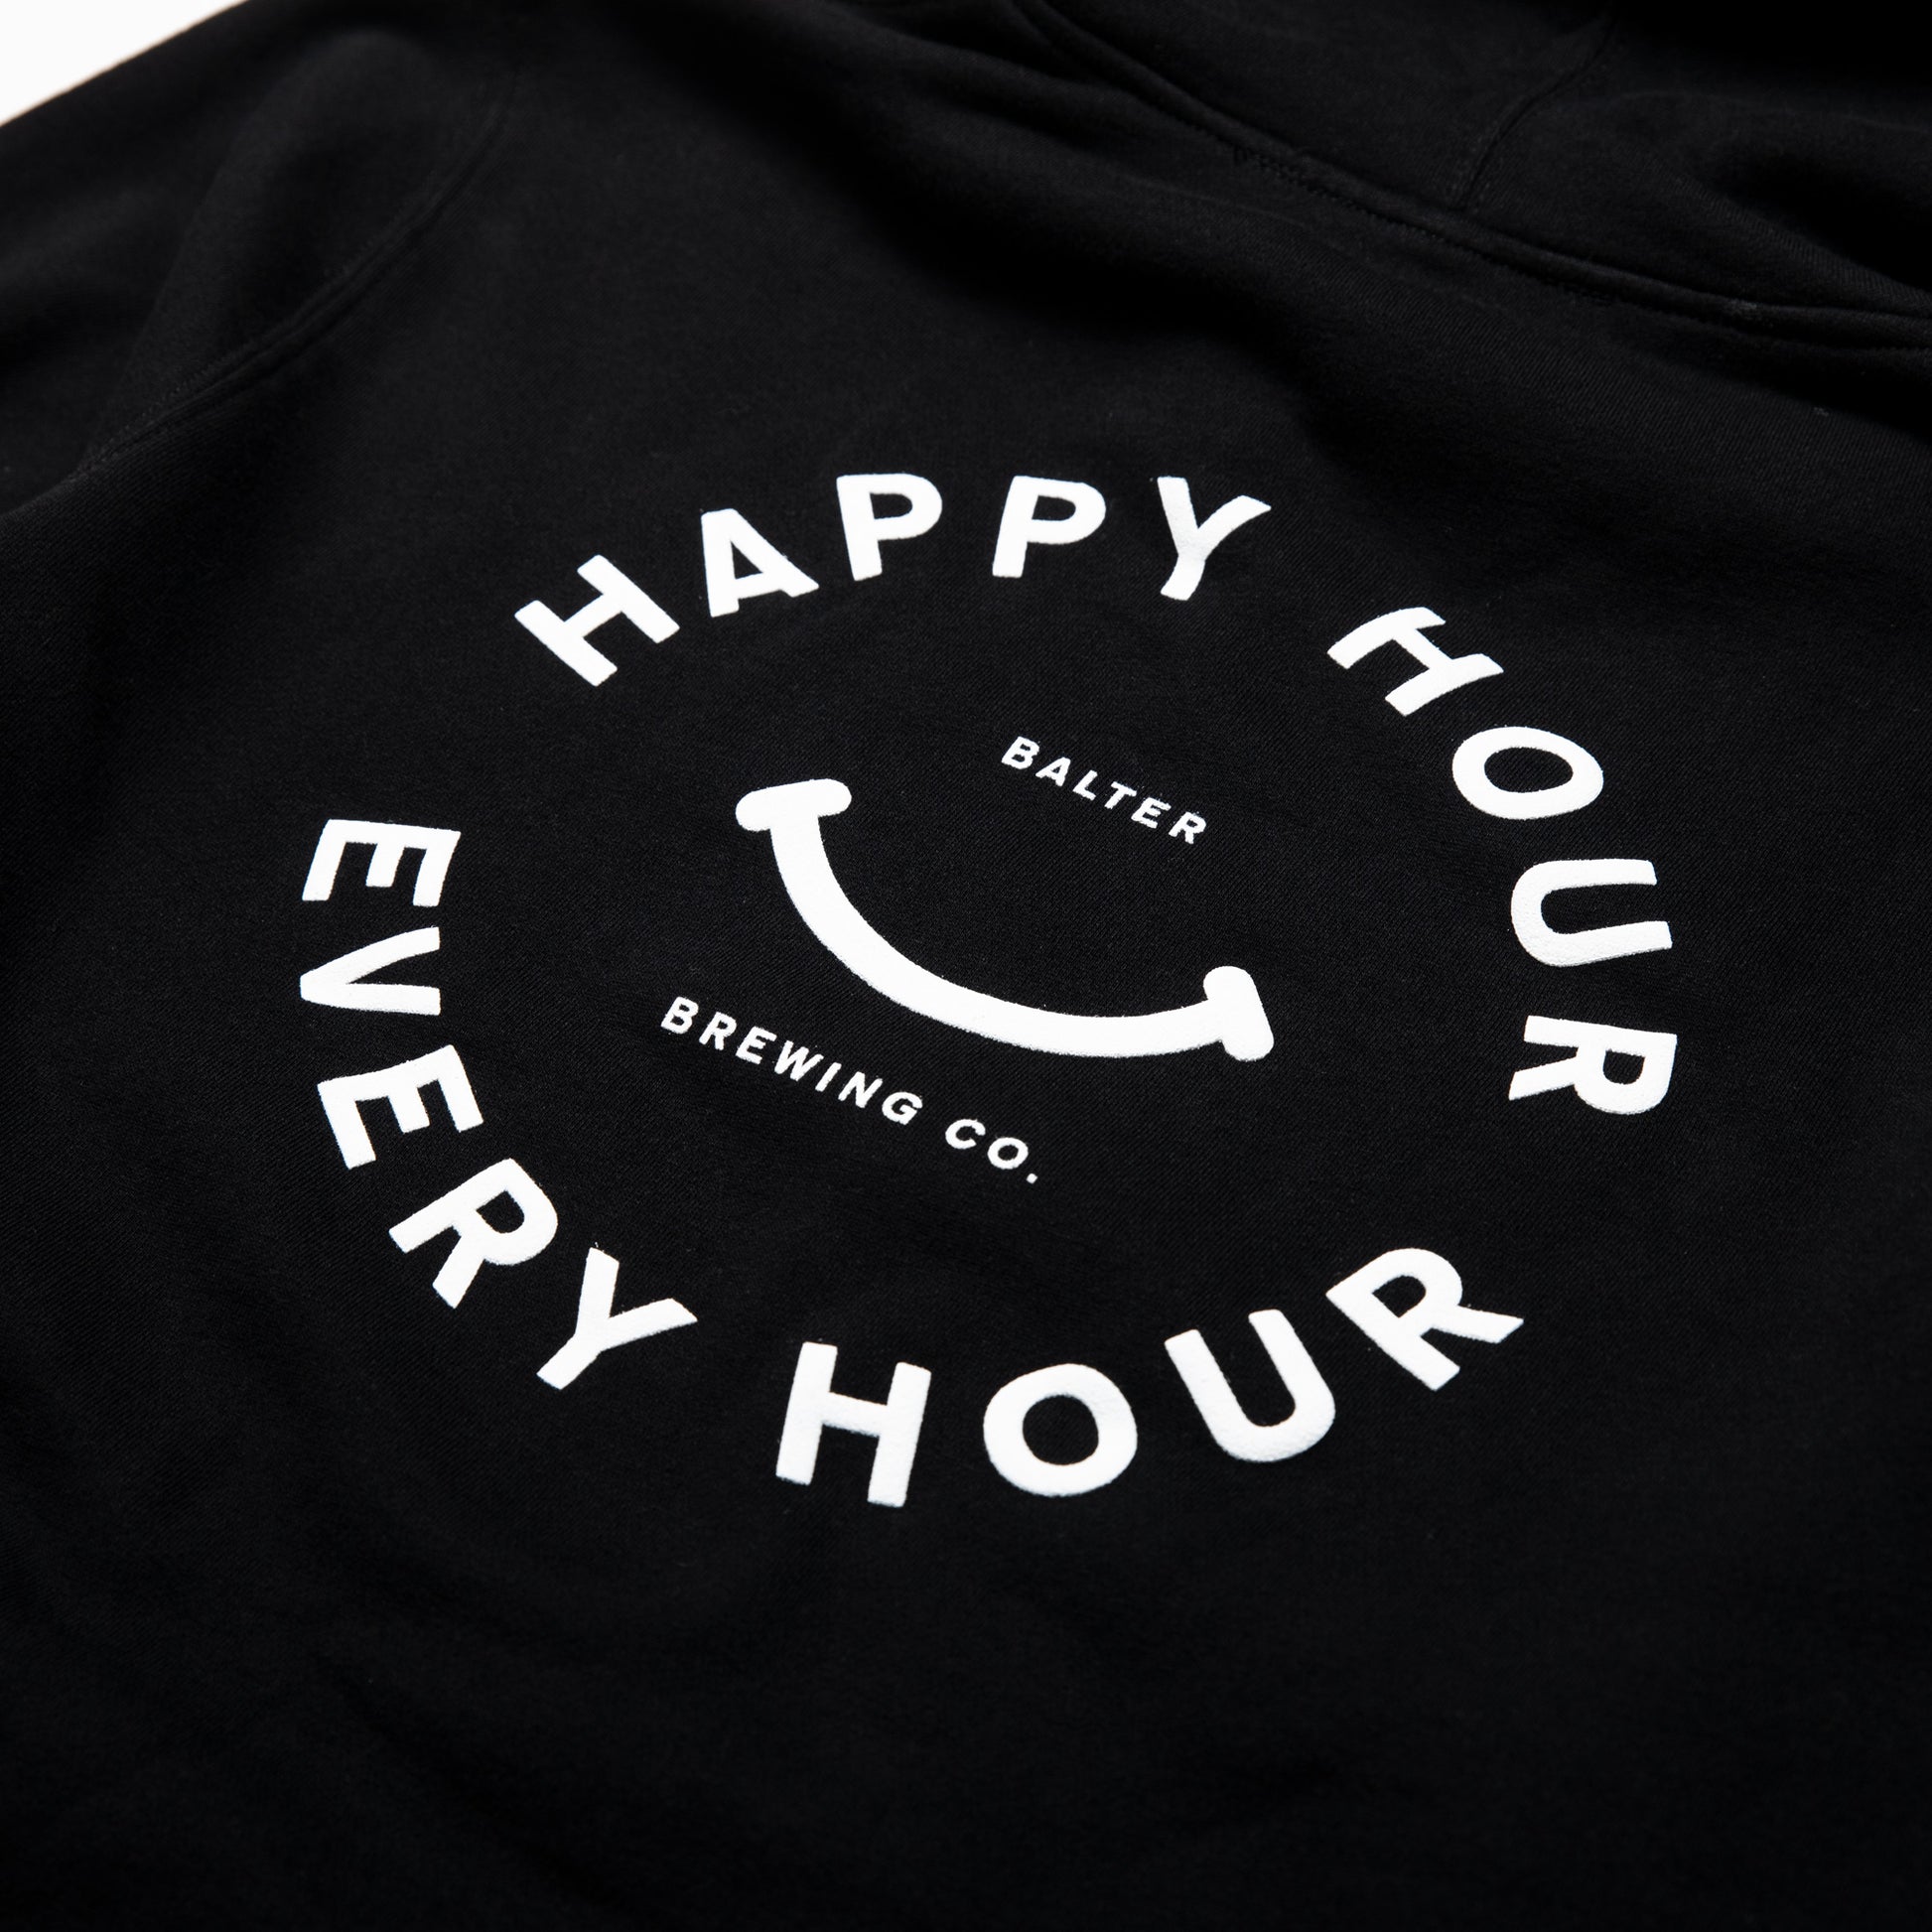 Happy Hour Every Hour Hoodie - Black - Balter Brewing Company - Craft Beer Merch Australia